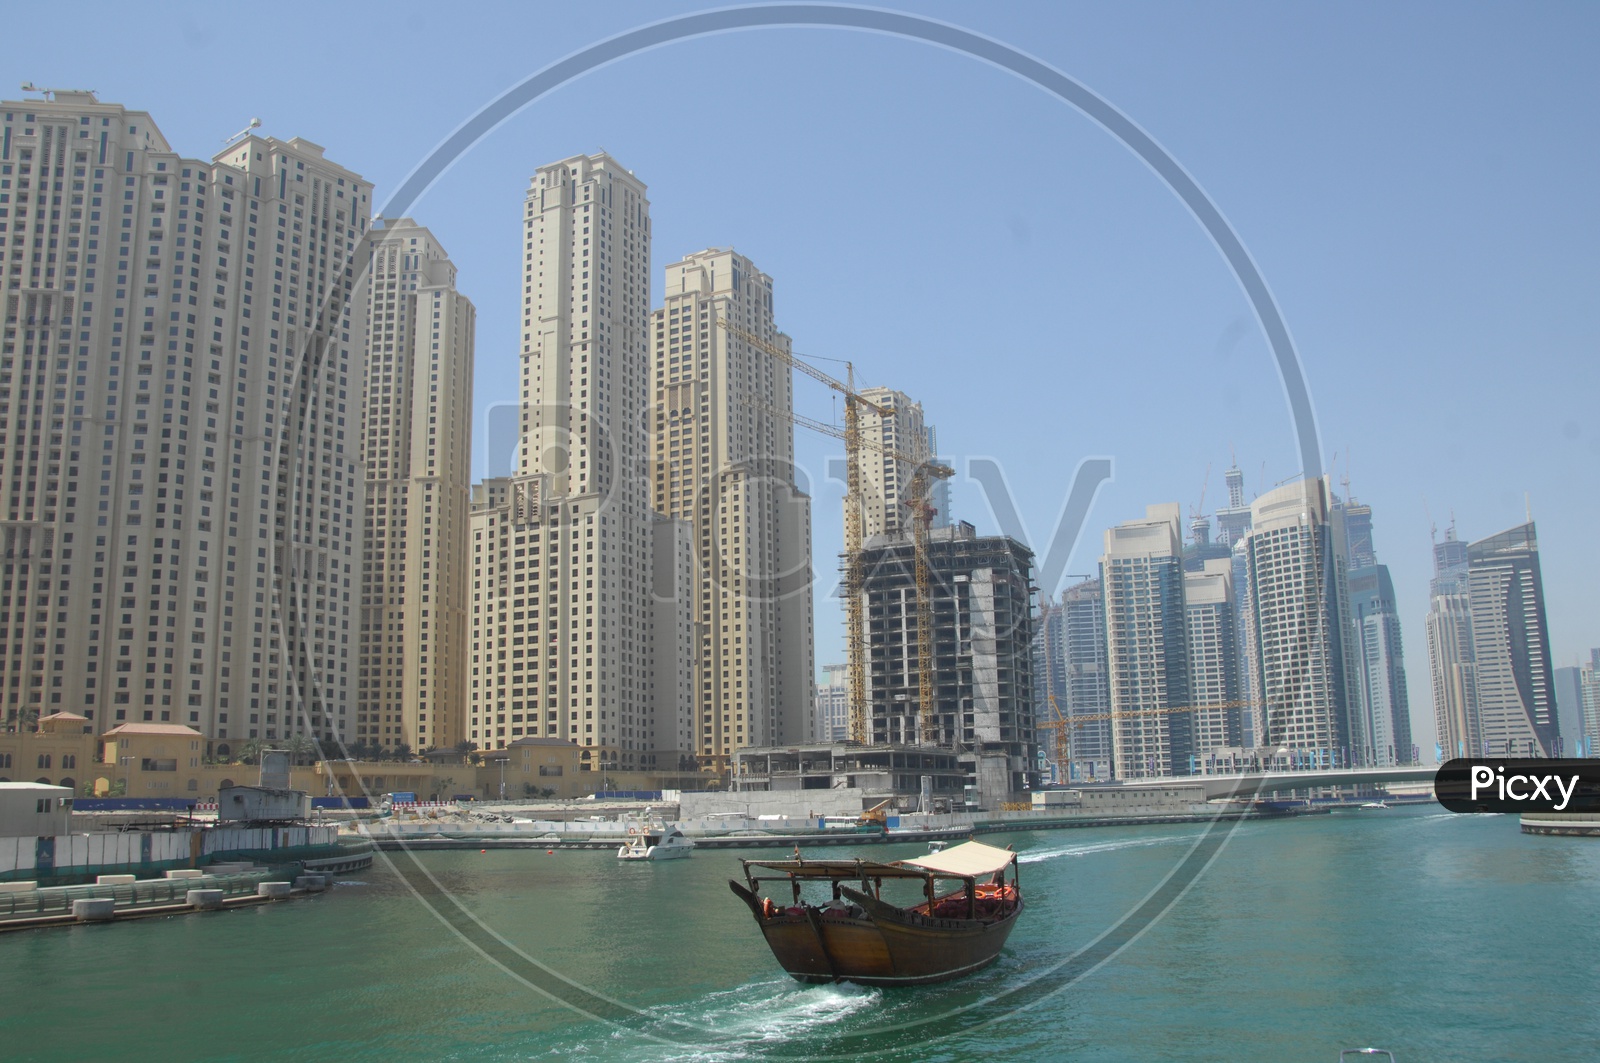 View of the city from the beach - Blue waters, tall buildings and a boat